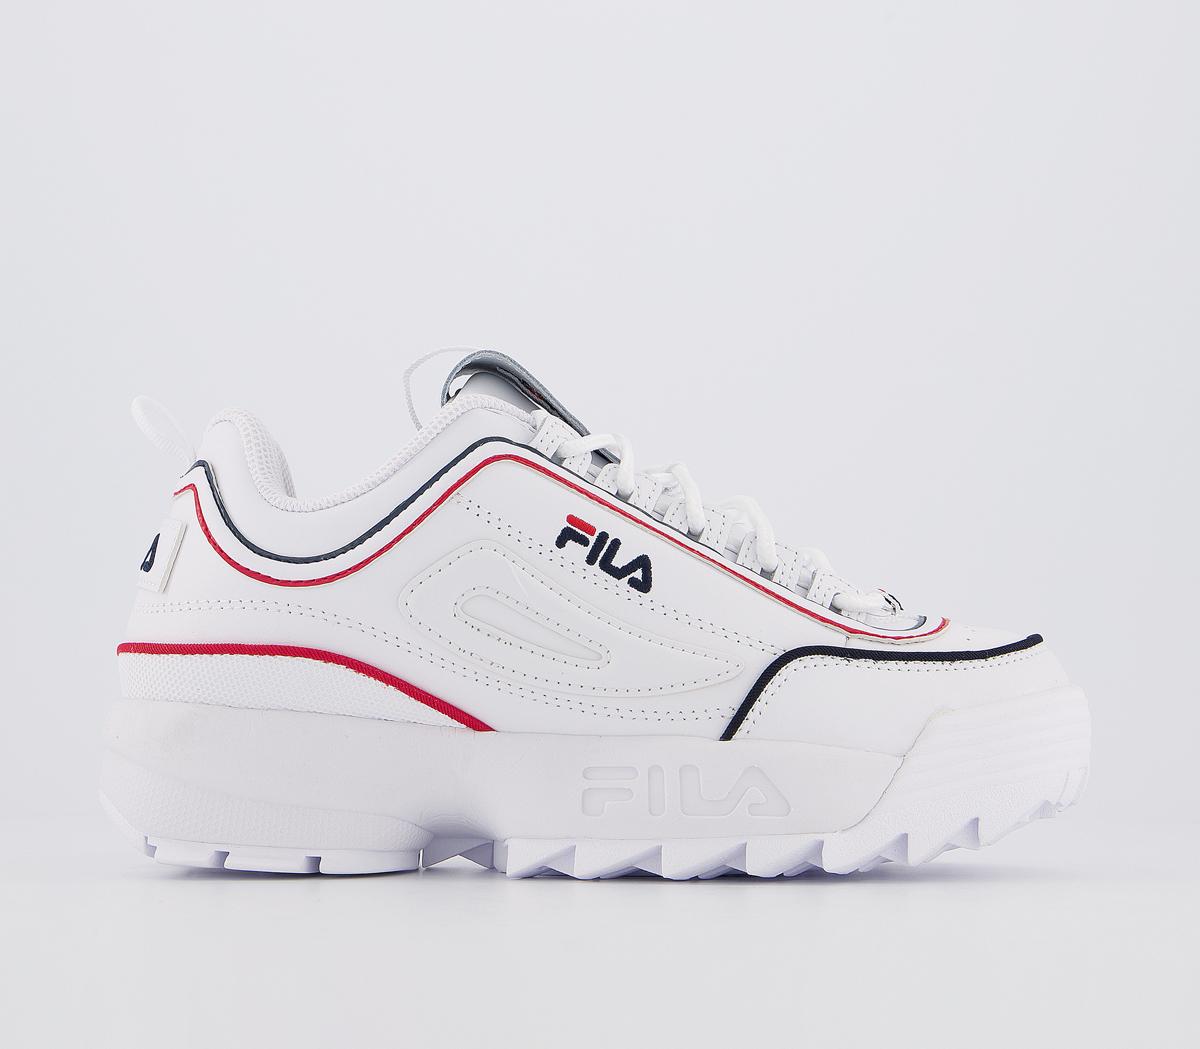 Fila Disruptor II Trainers White Navy Red Piping - Hers trainers